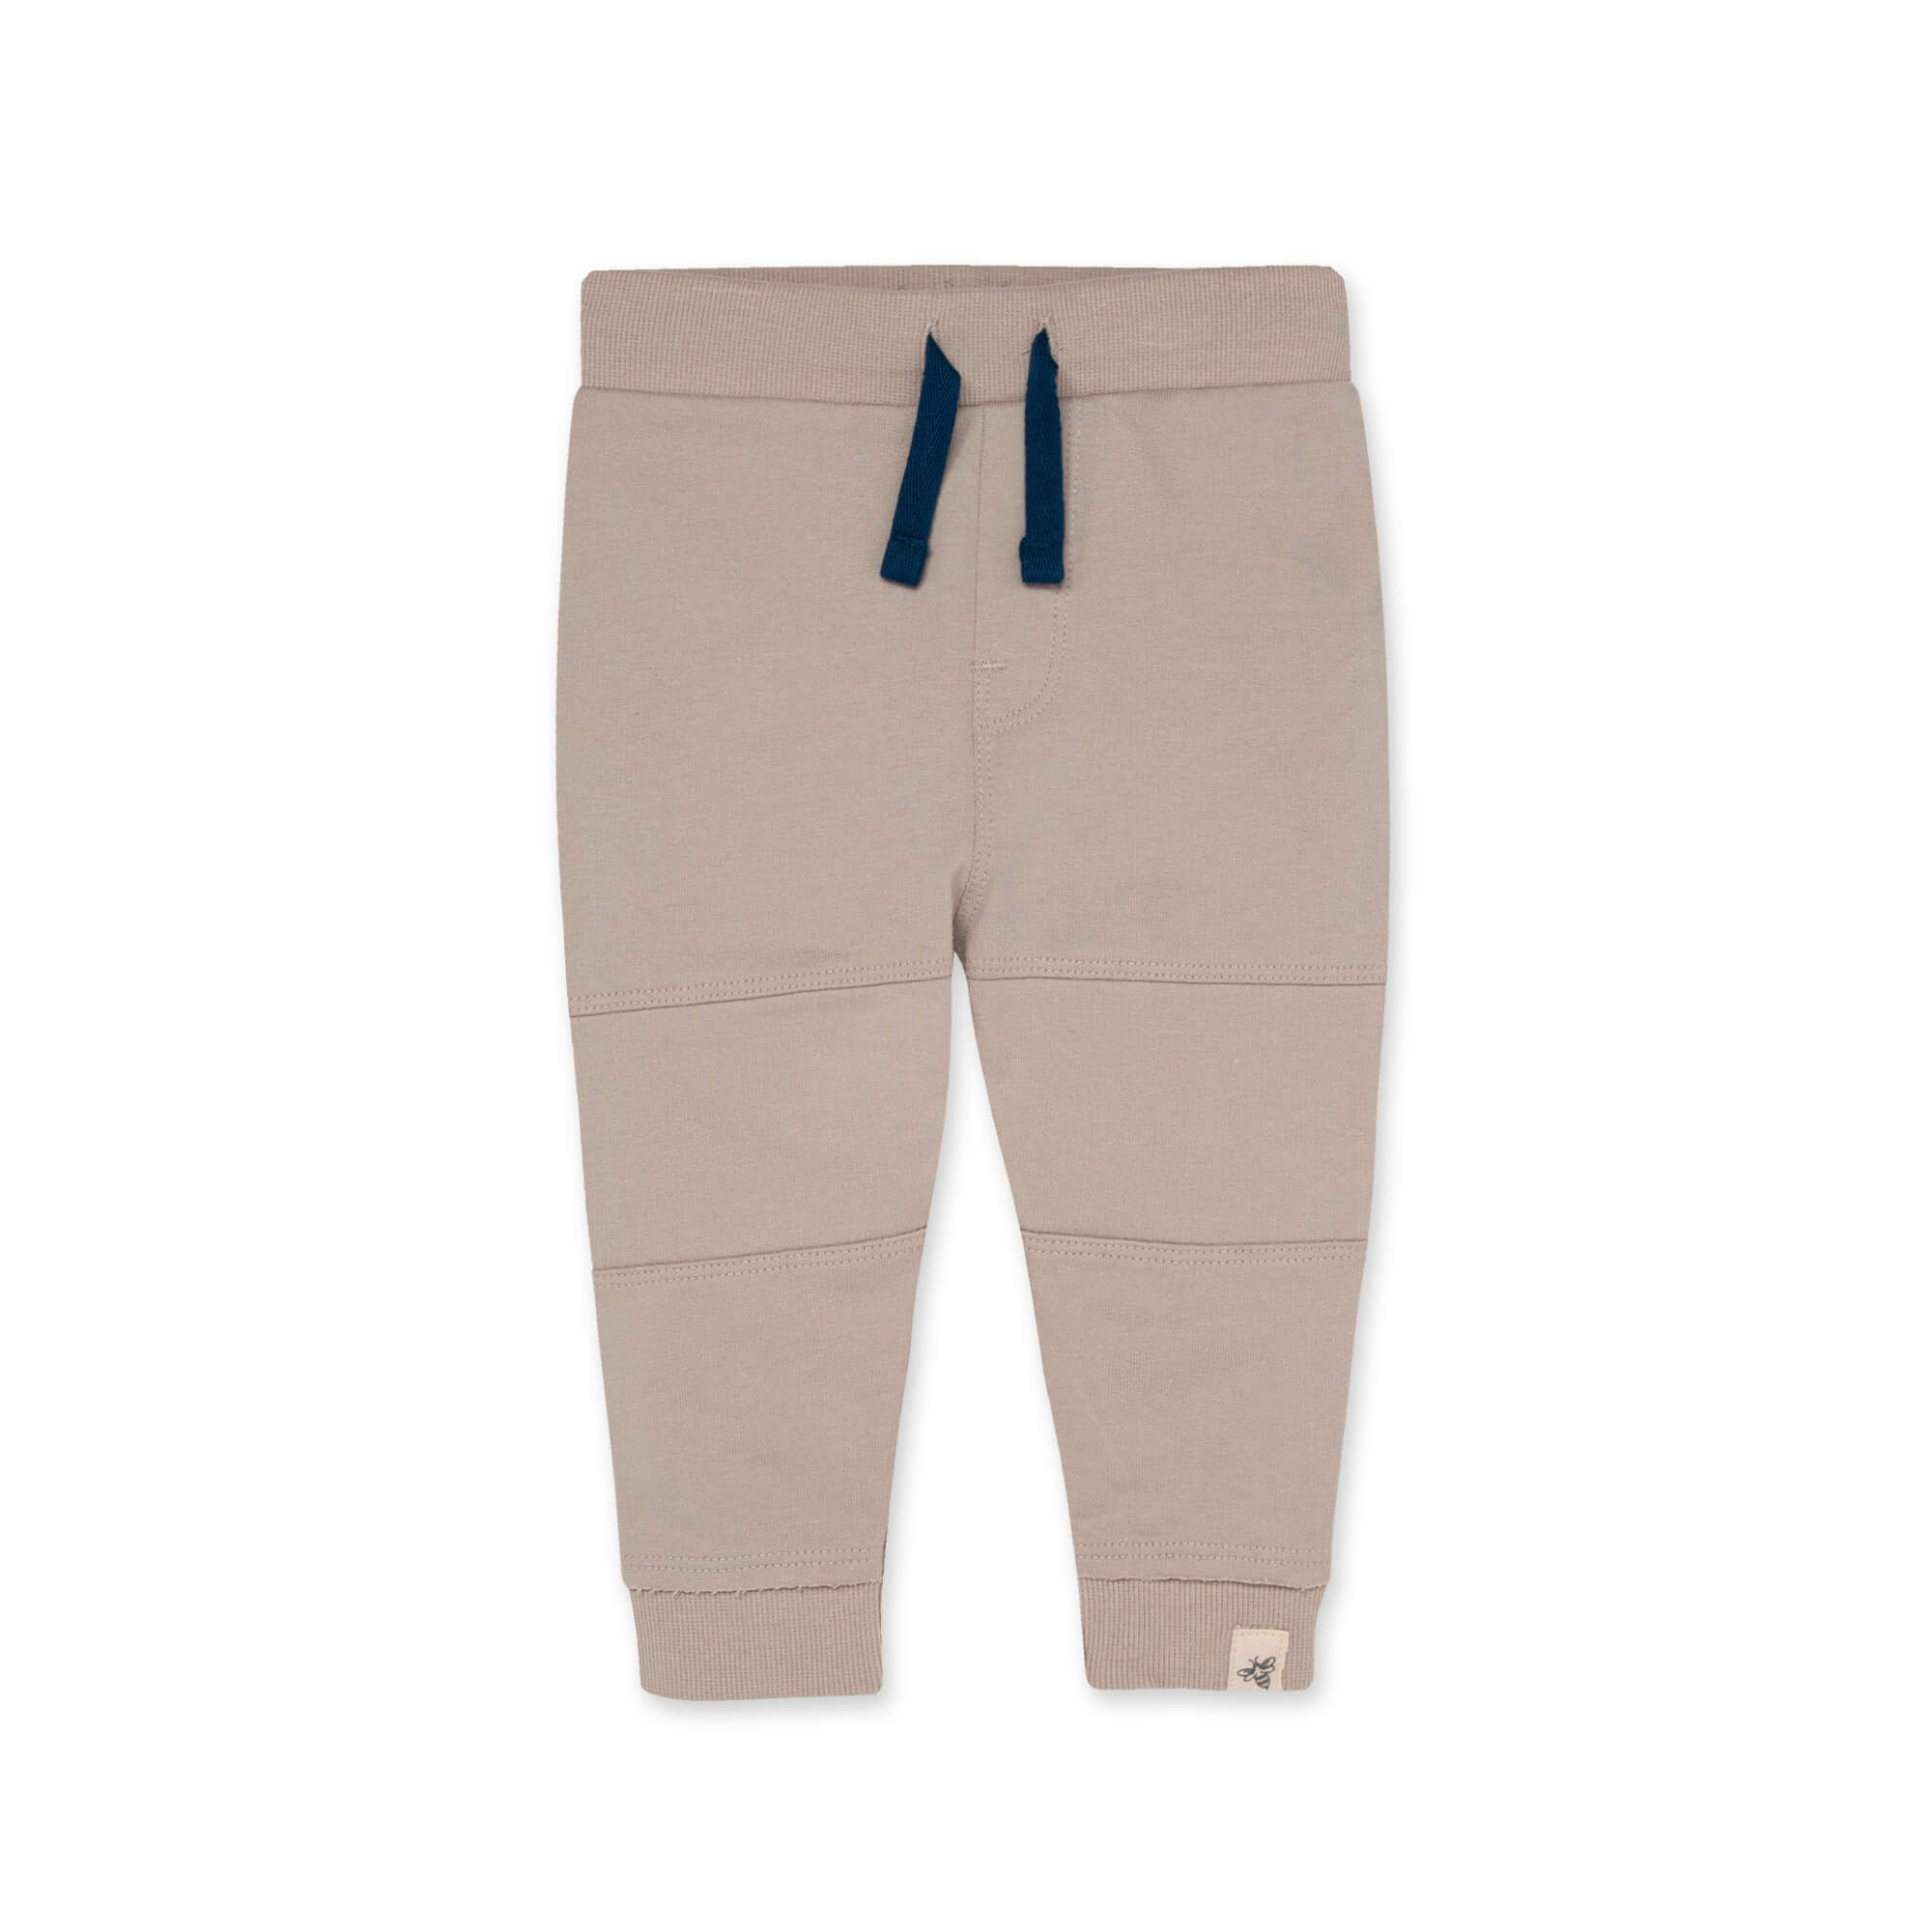 Baby Trousers Supersoft Cotton Unisex Leggings Teddley/’s Sky Balloons Col 100/% GOTS Organic Certified Pants Joggers for Baby Boys /& Baby Girls